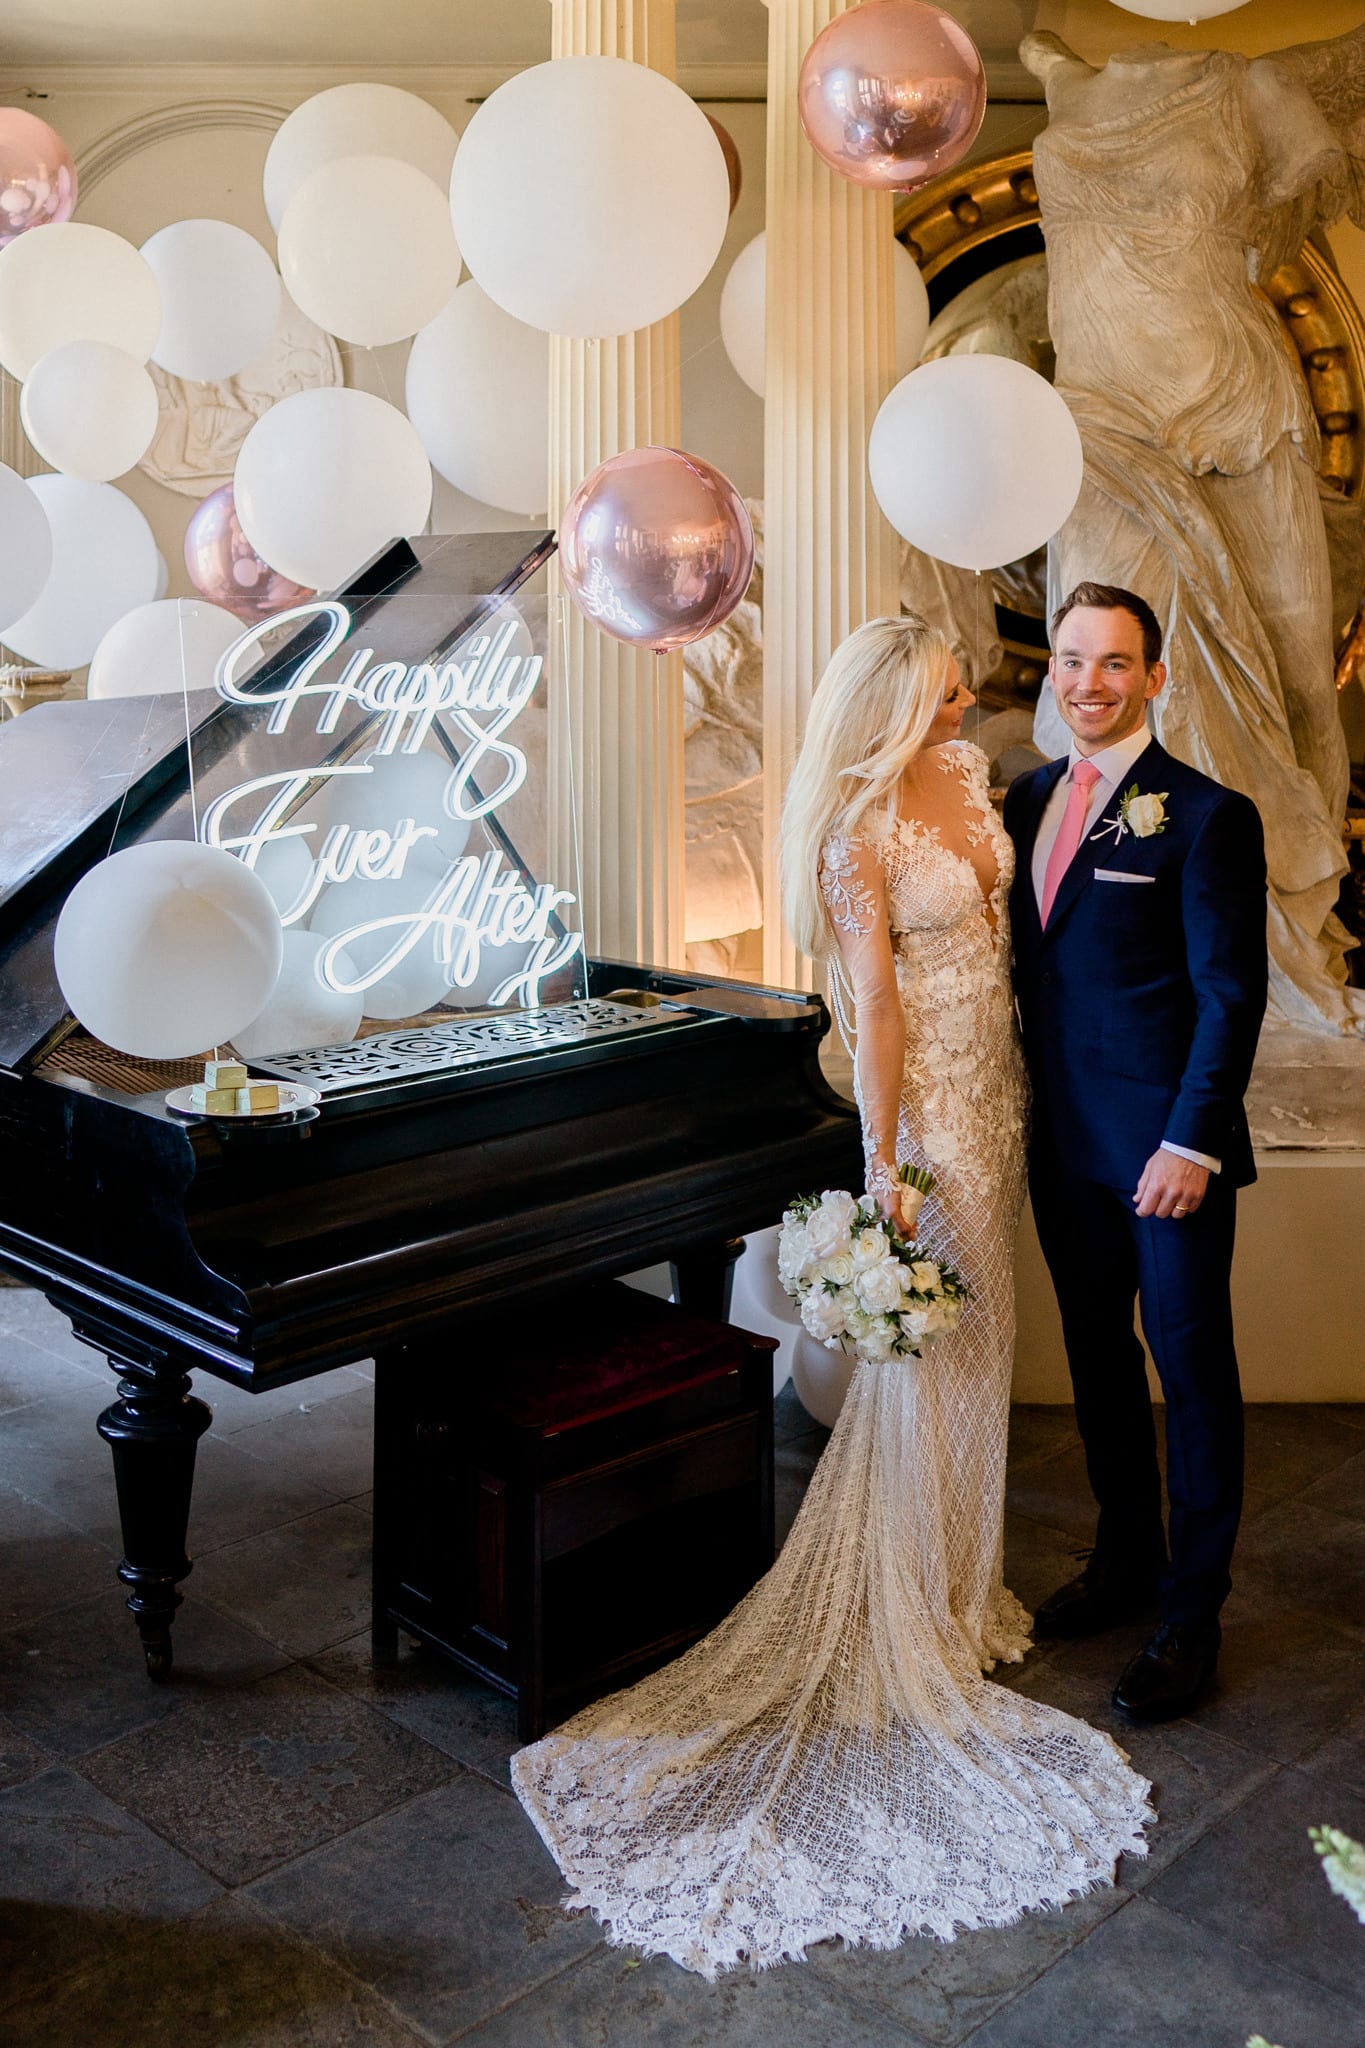 white balloons embellishing the black grand piano with neon sign